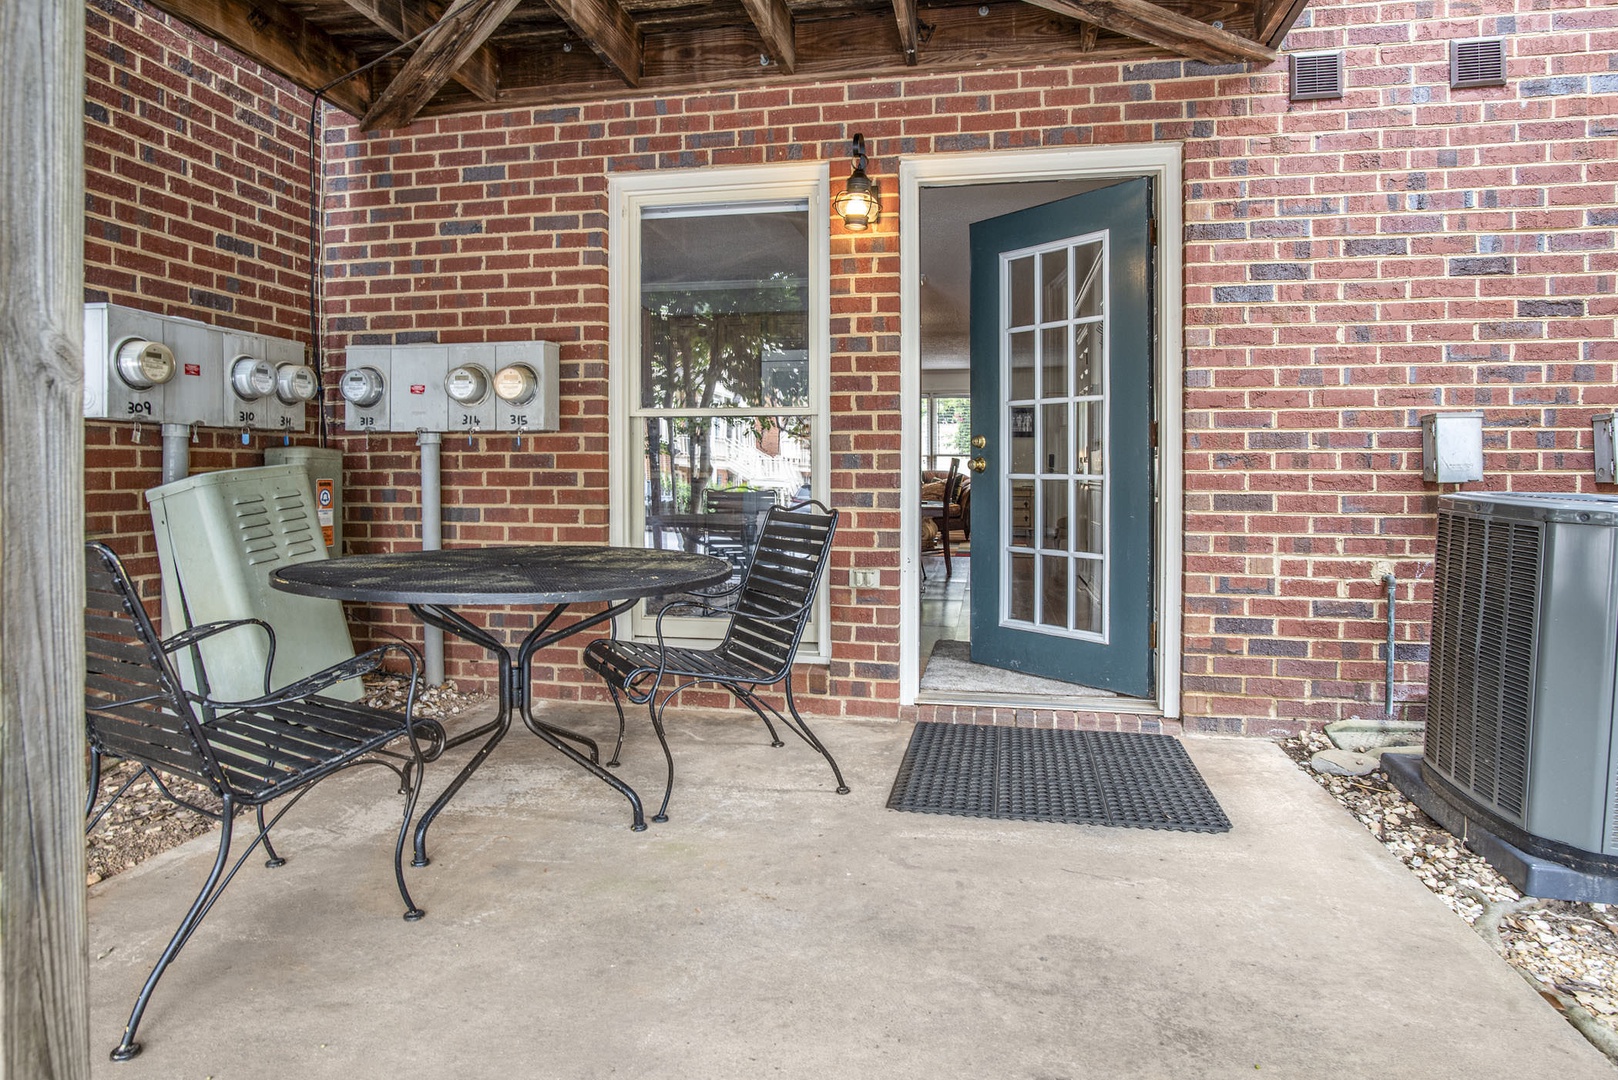 Outdoor seating and front entry